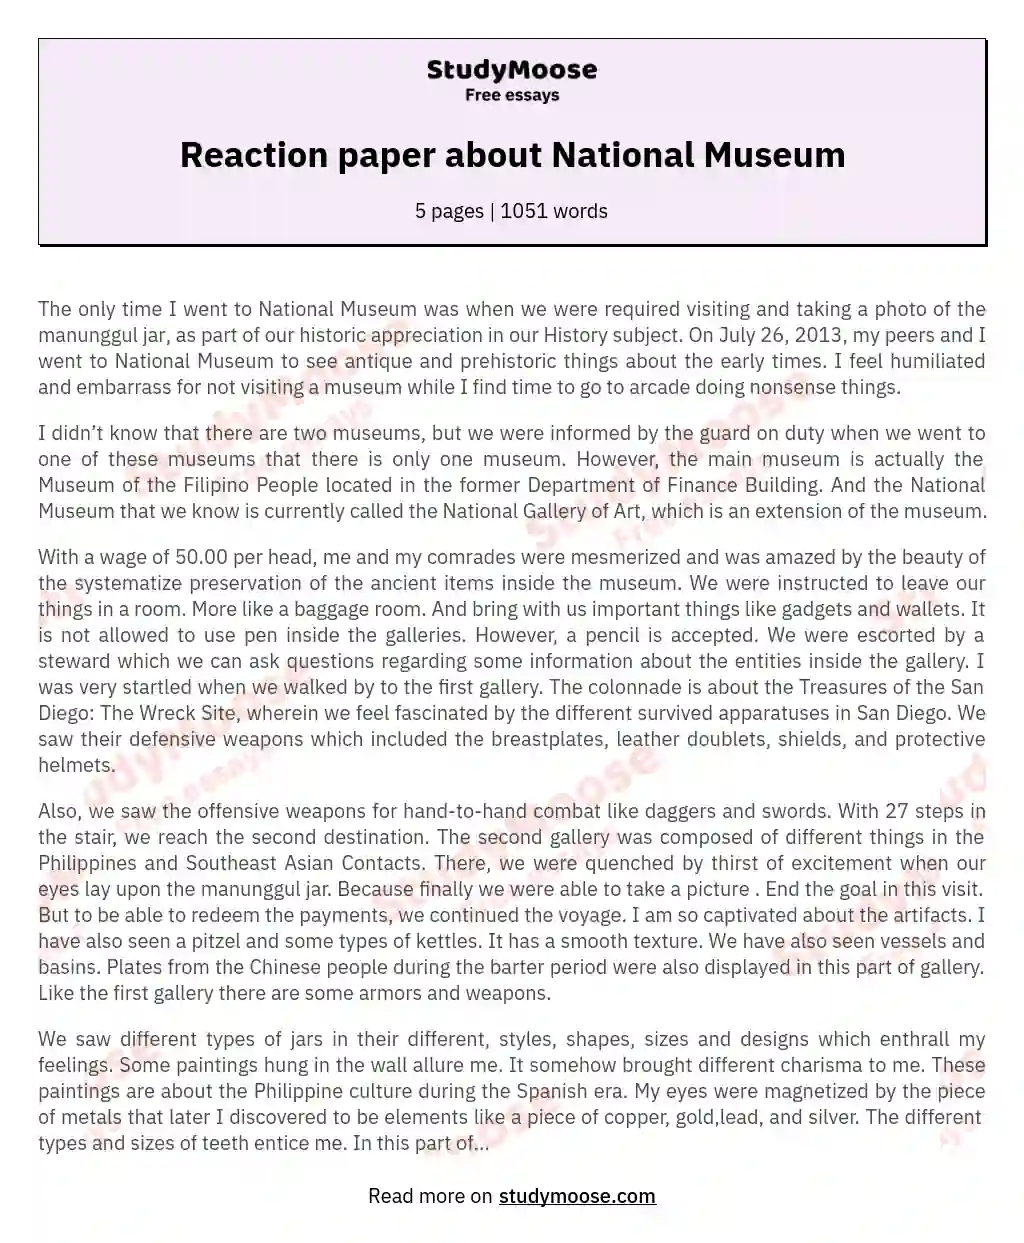 Reaction paper about National Museum essay